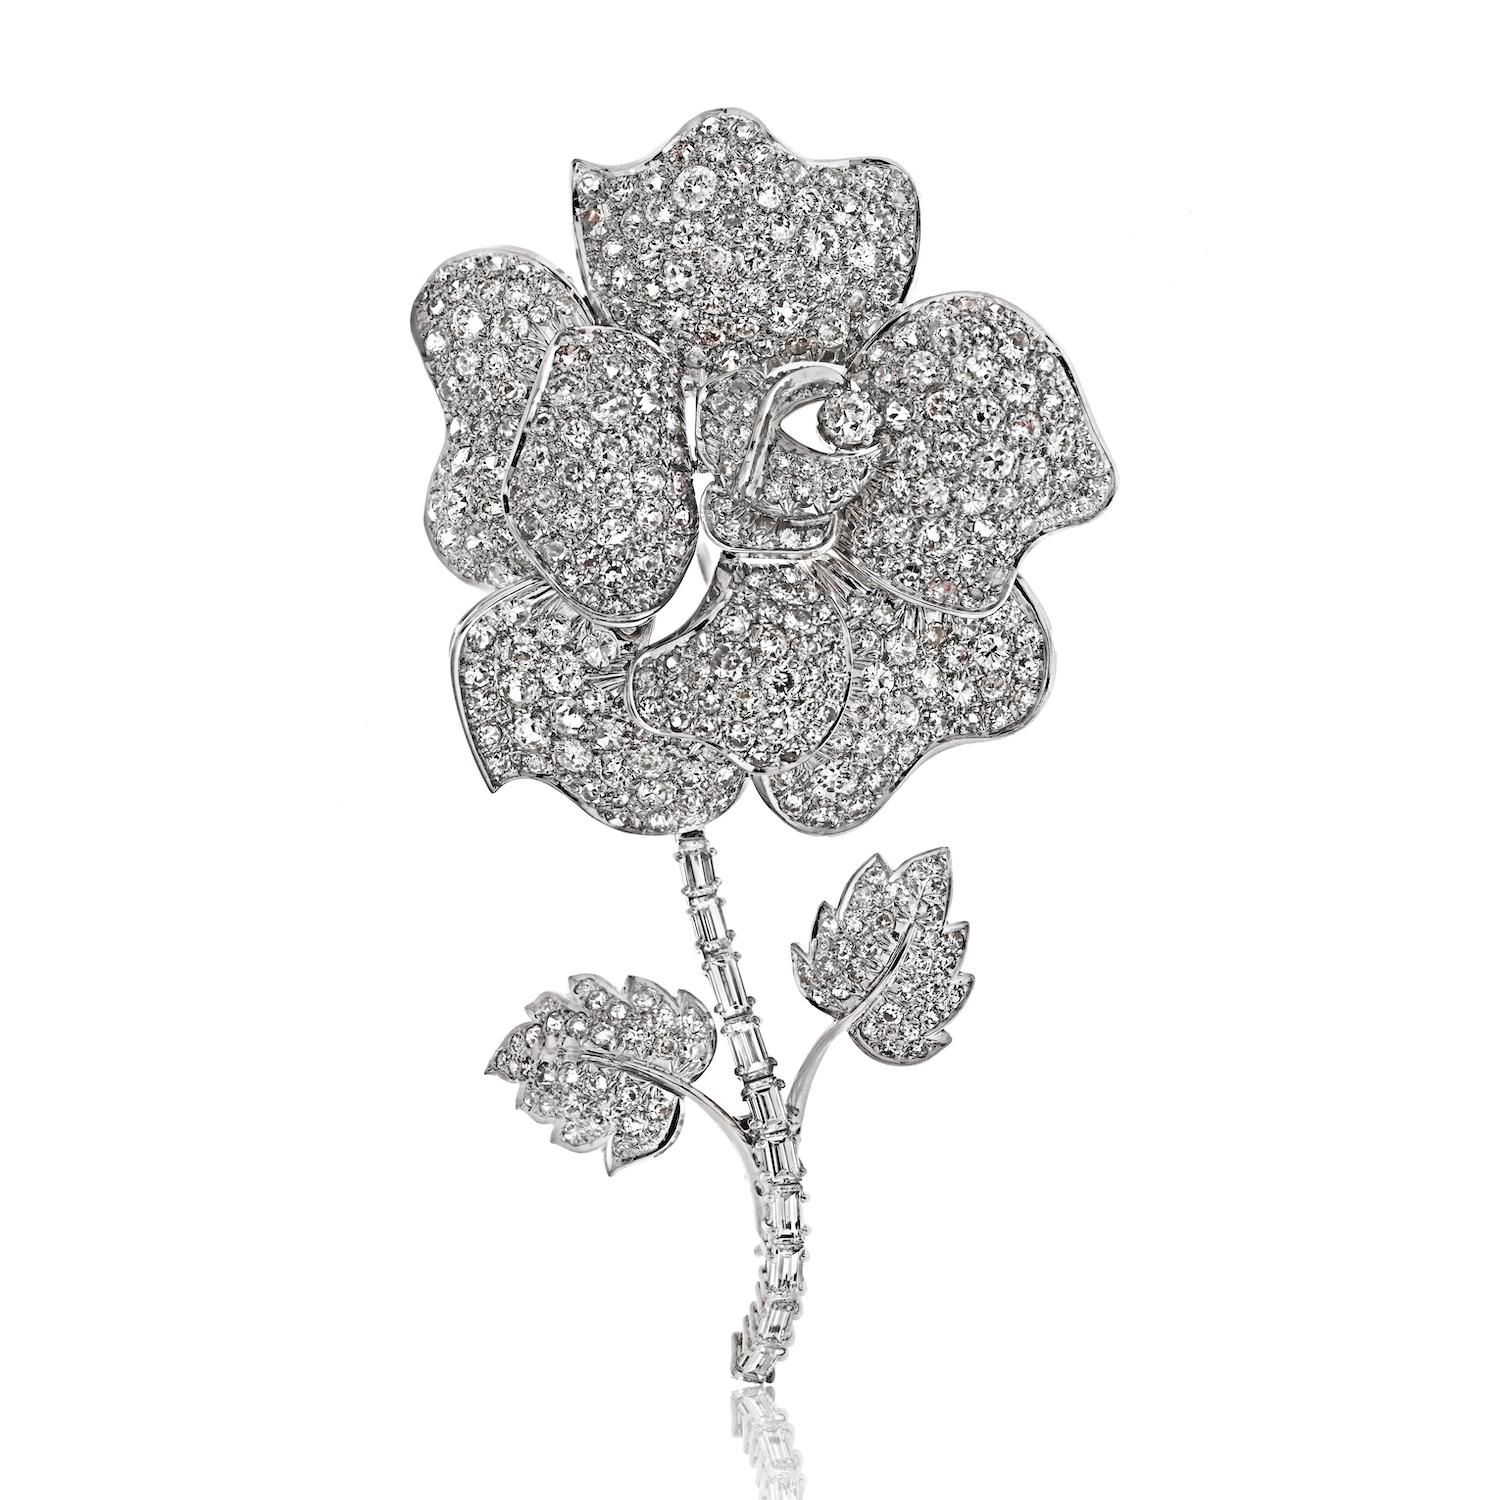 Elevate your jewelry collection with our exquisite Platinum 27 Carat Diamond Rose Flower Brooch. This magnificent piece is a true testament to craftsmanship and elegance. Adorned with over 300 dazzling round diamonds, this brooch captures the